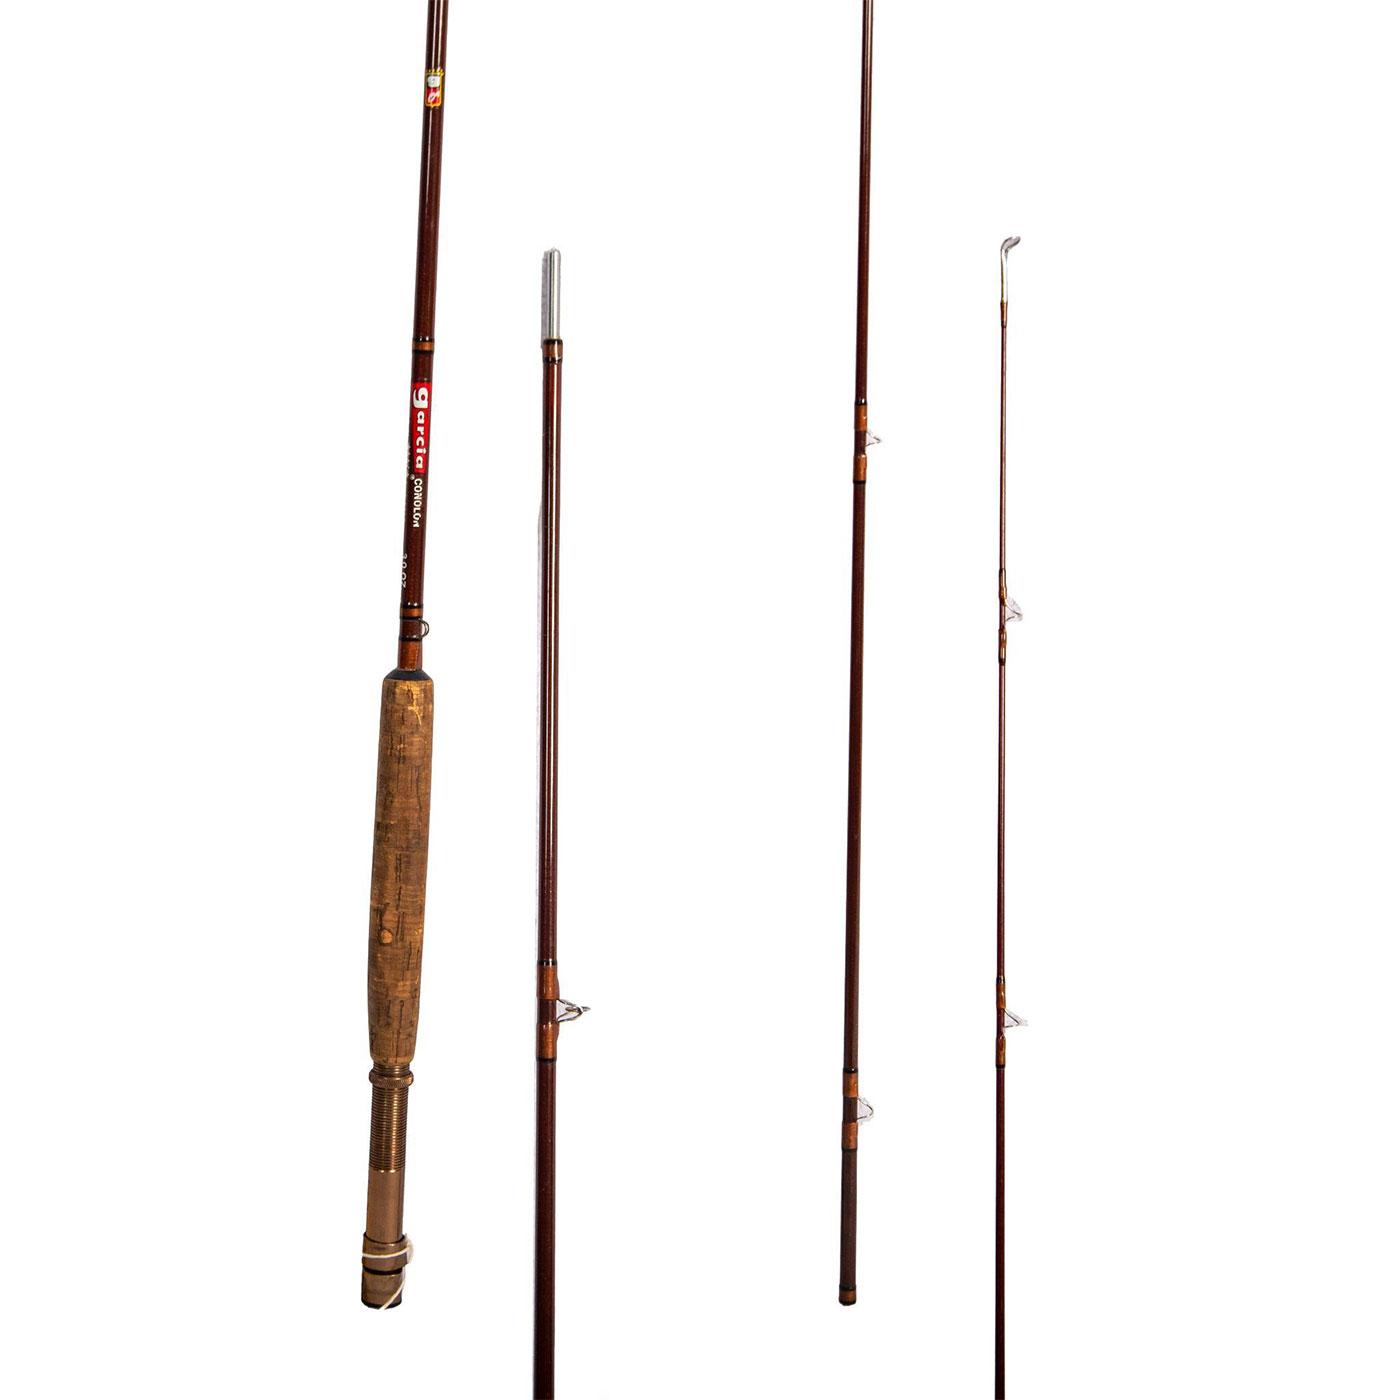 Garcia Conolon 5 Star Fly Rod 2402-A 7 Ft. 6 Weight